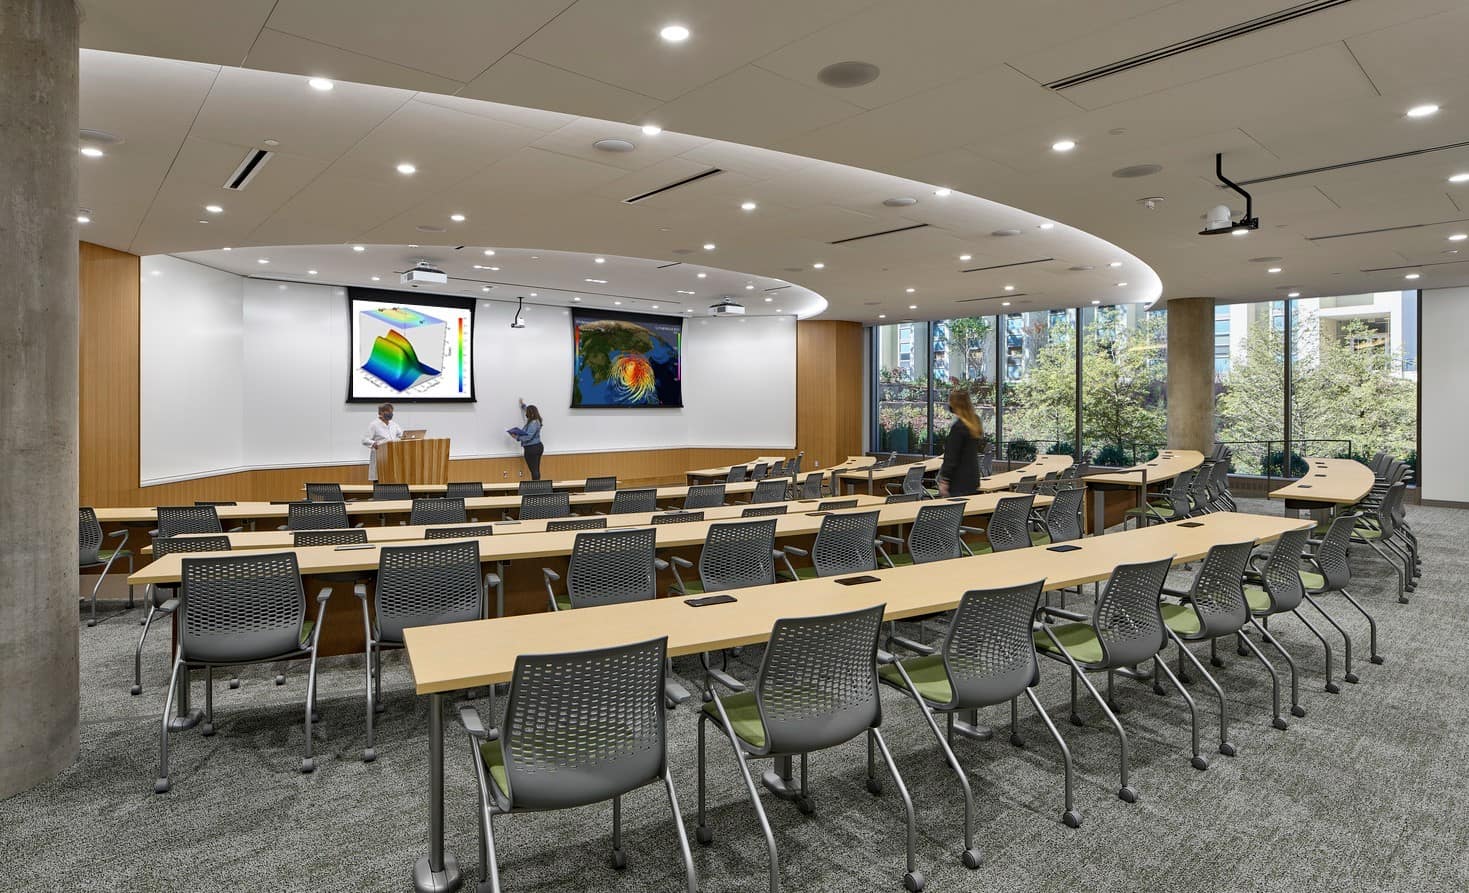 Hall of Science indoor lecture room with many chair and tables